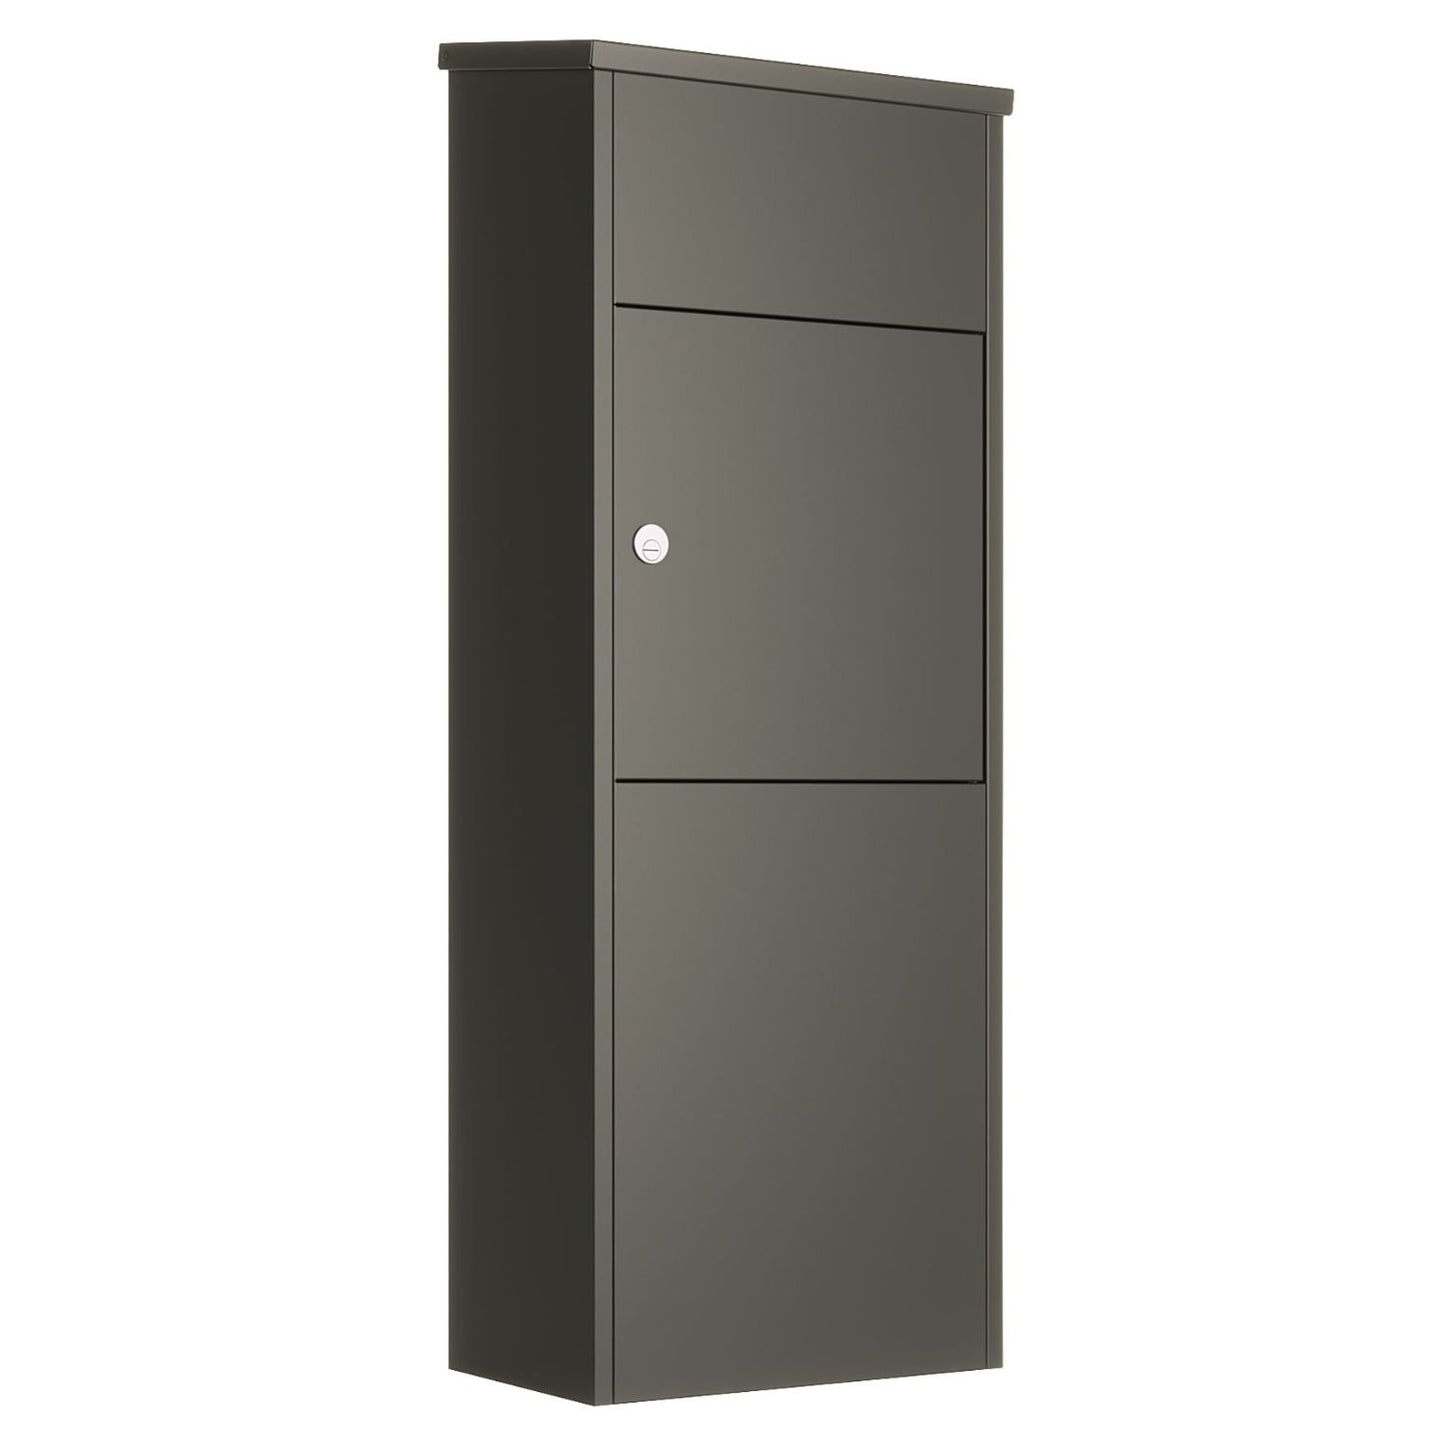 TOWER 2500 - Secure package delivery lock box